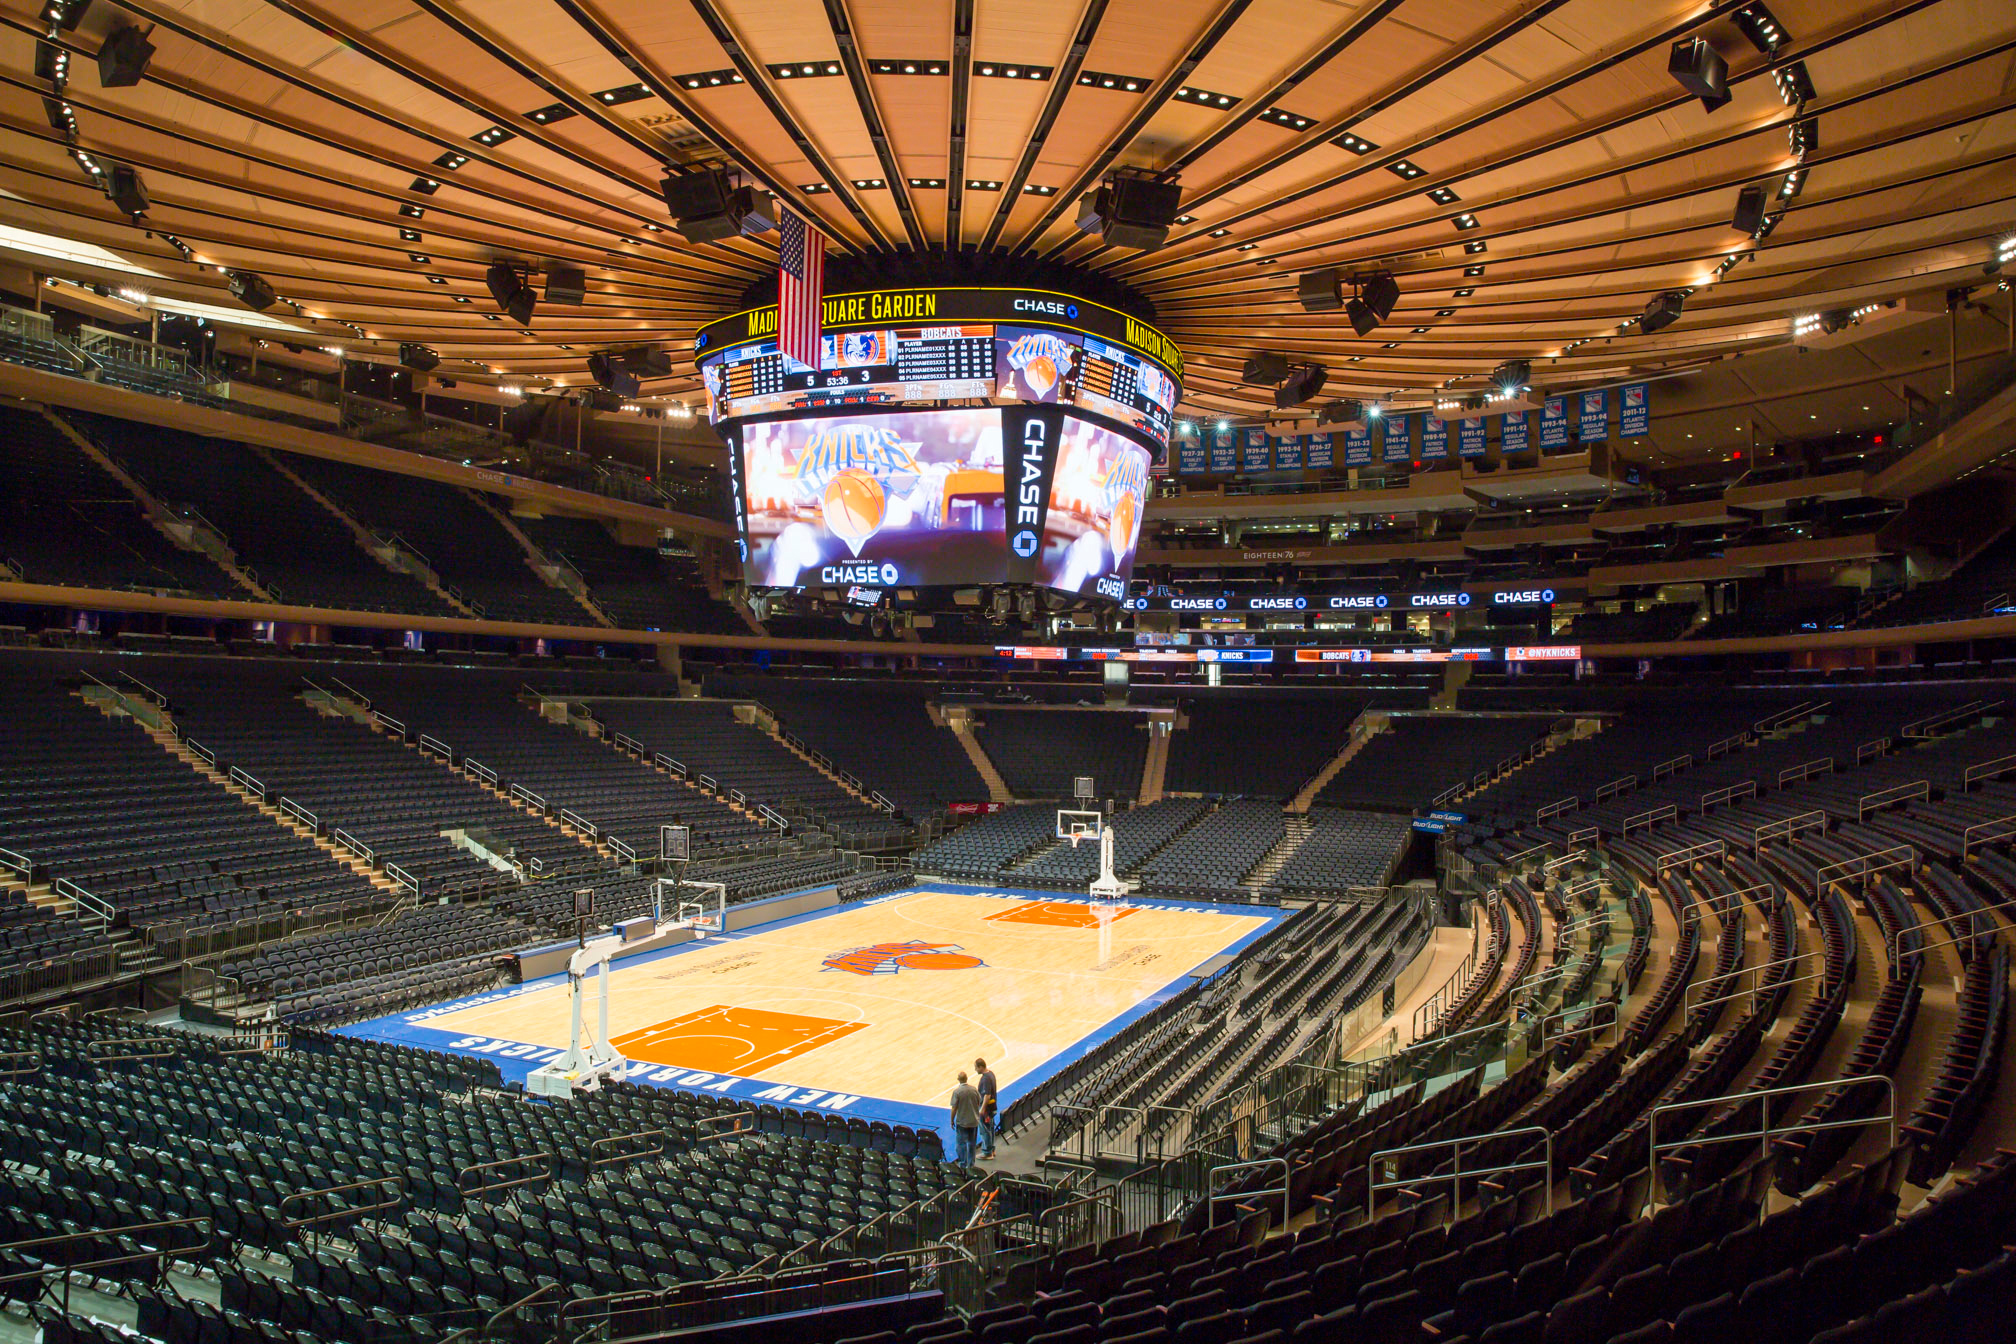 check-out-madison-square-garden-in-new-york-photos-boomsbeat